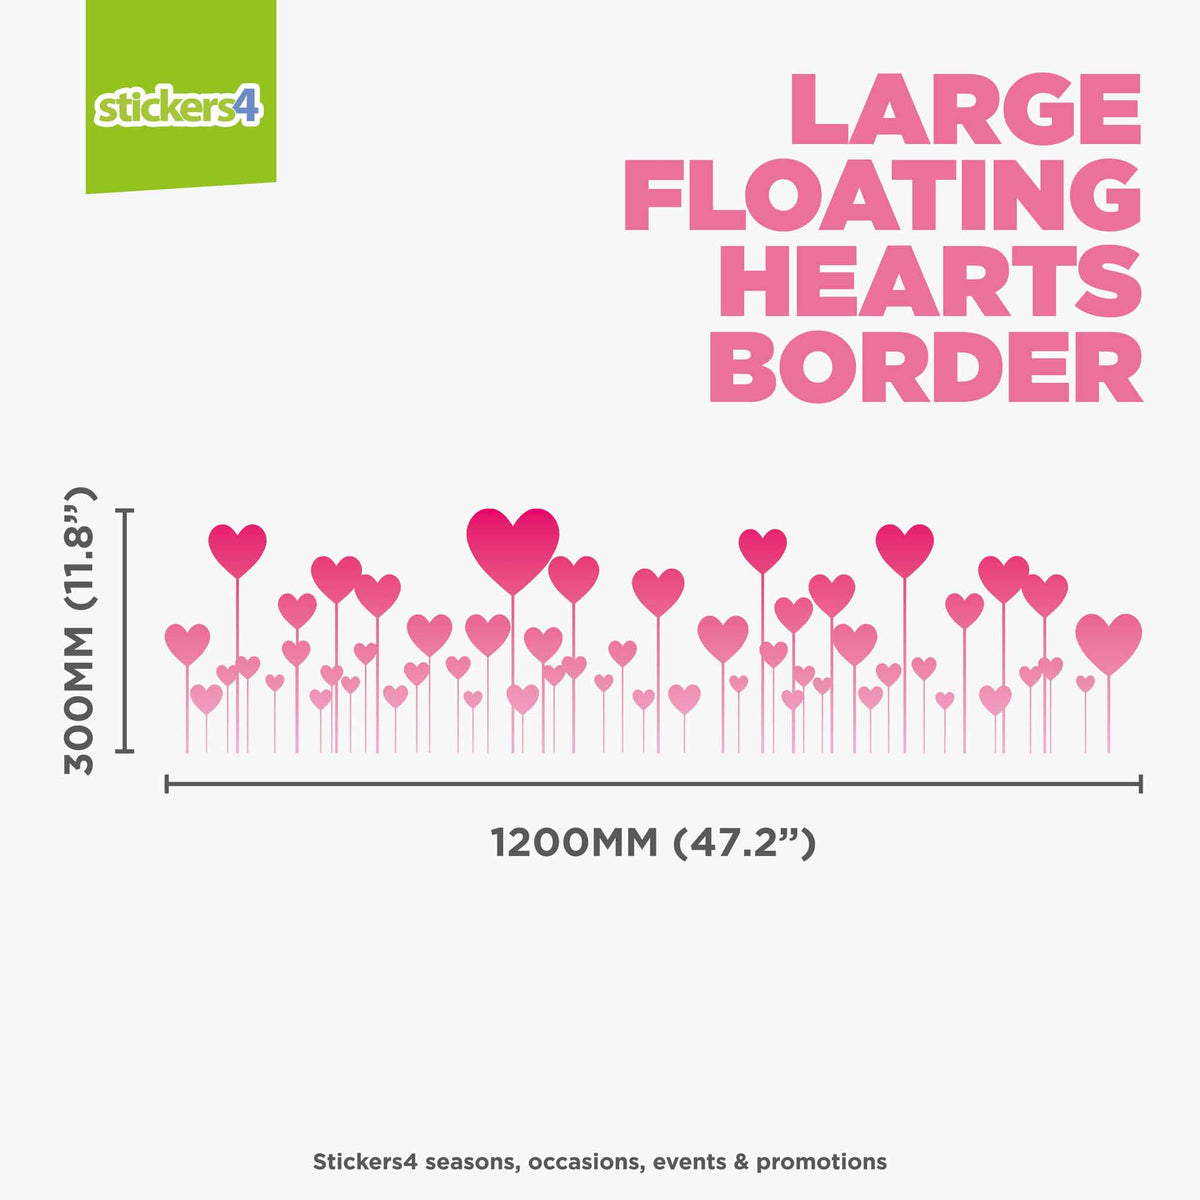 Large Floating Hearts Border Window Cling